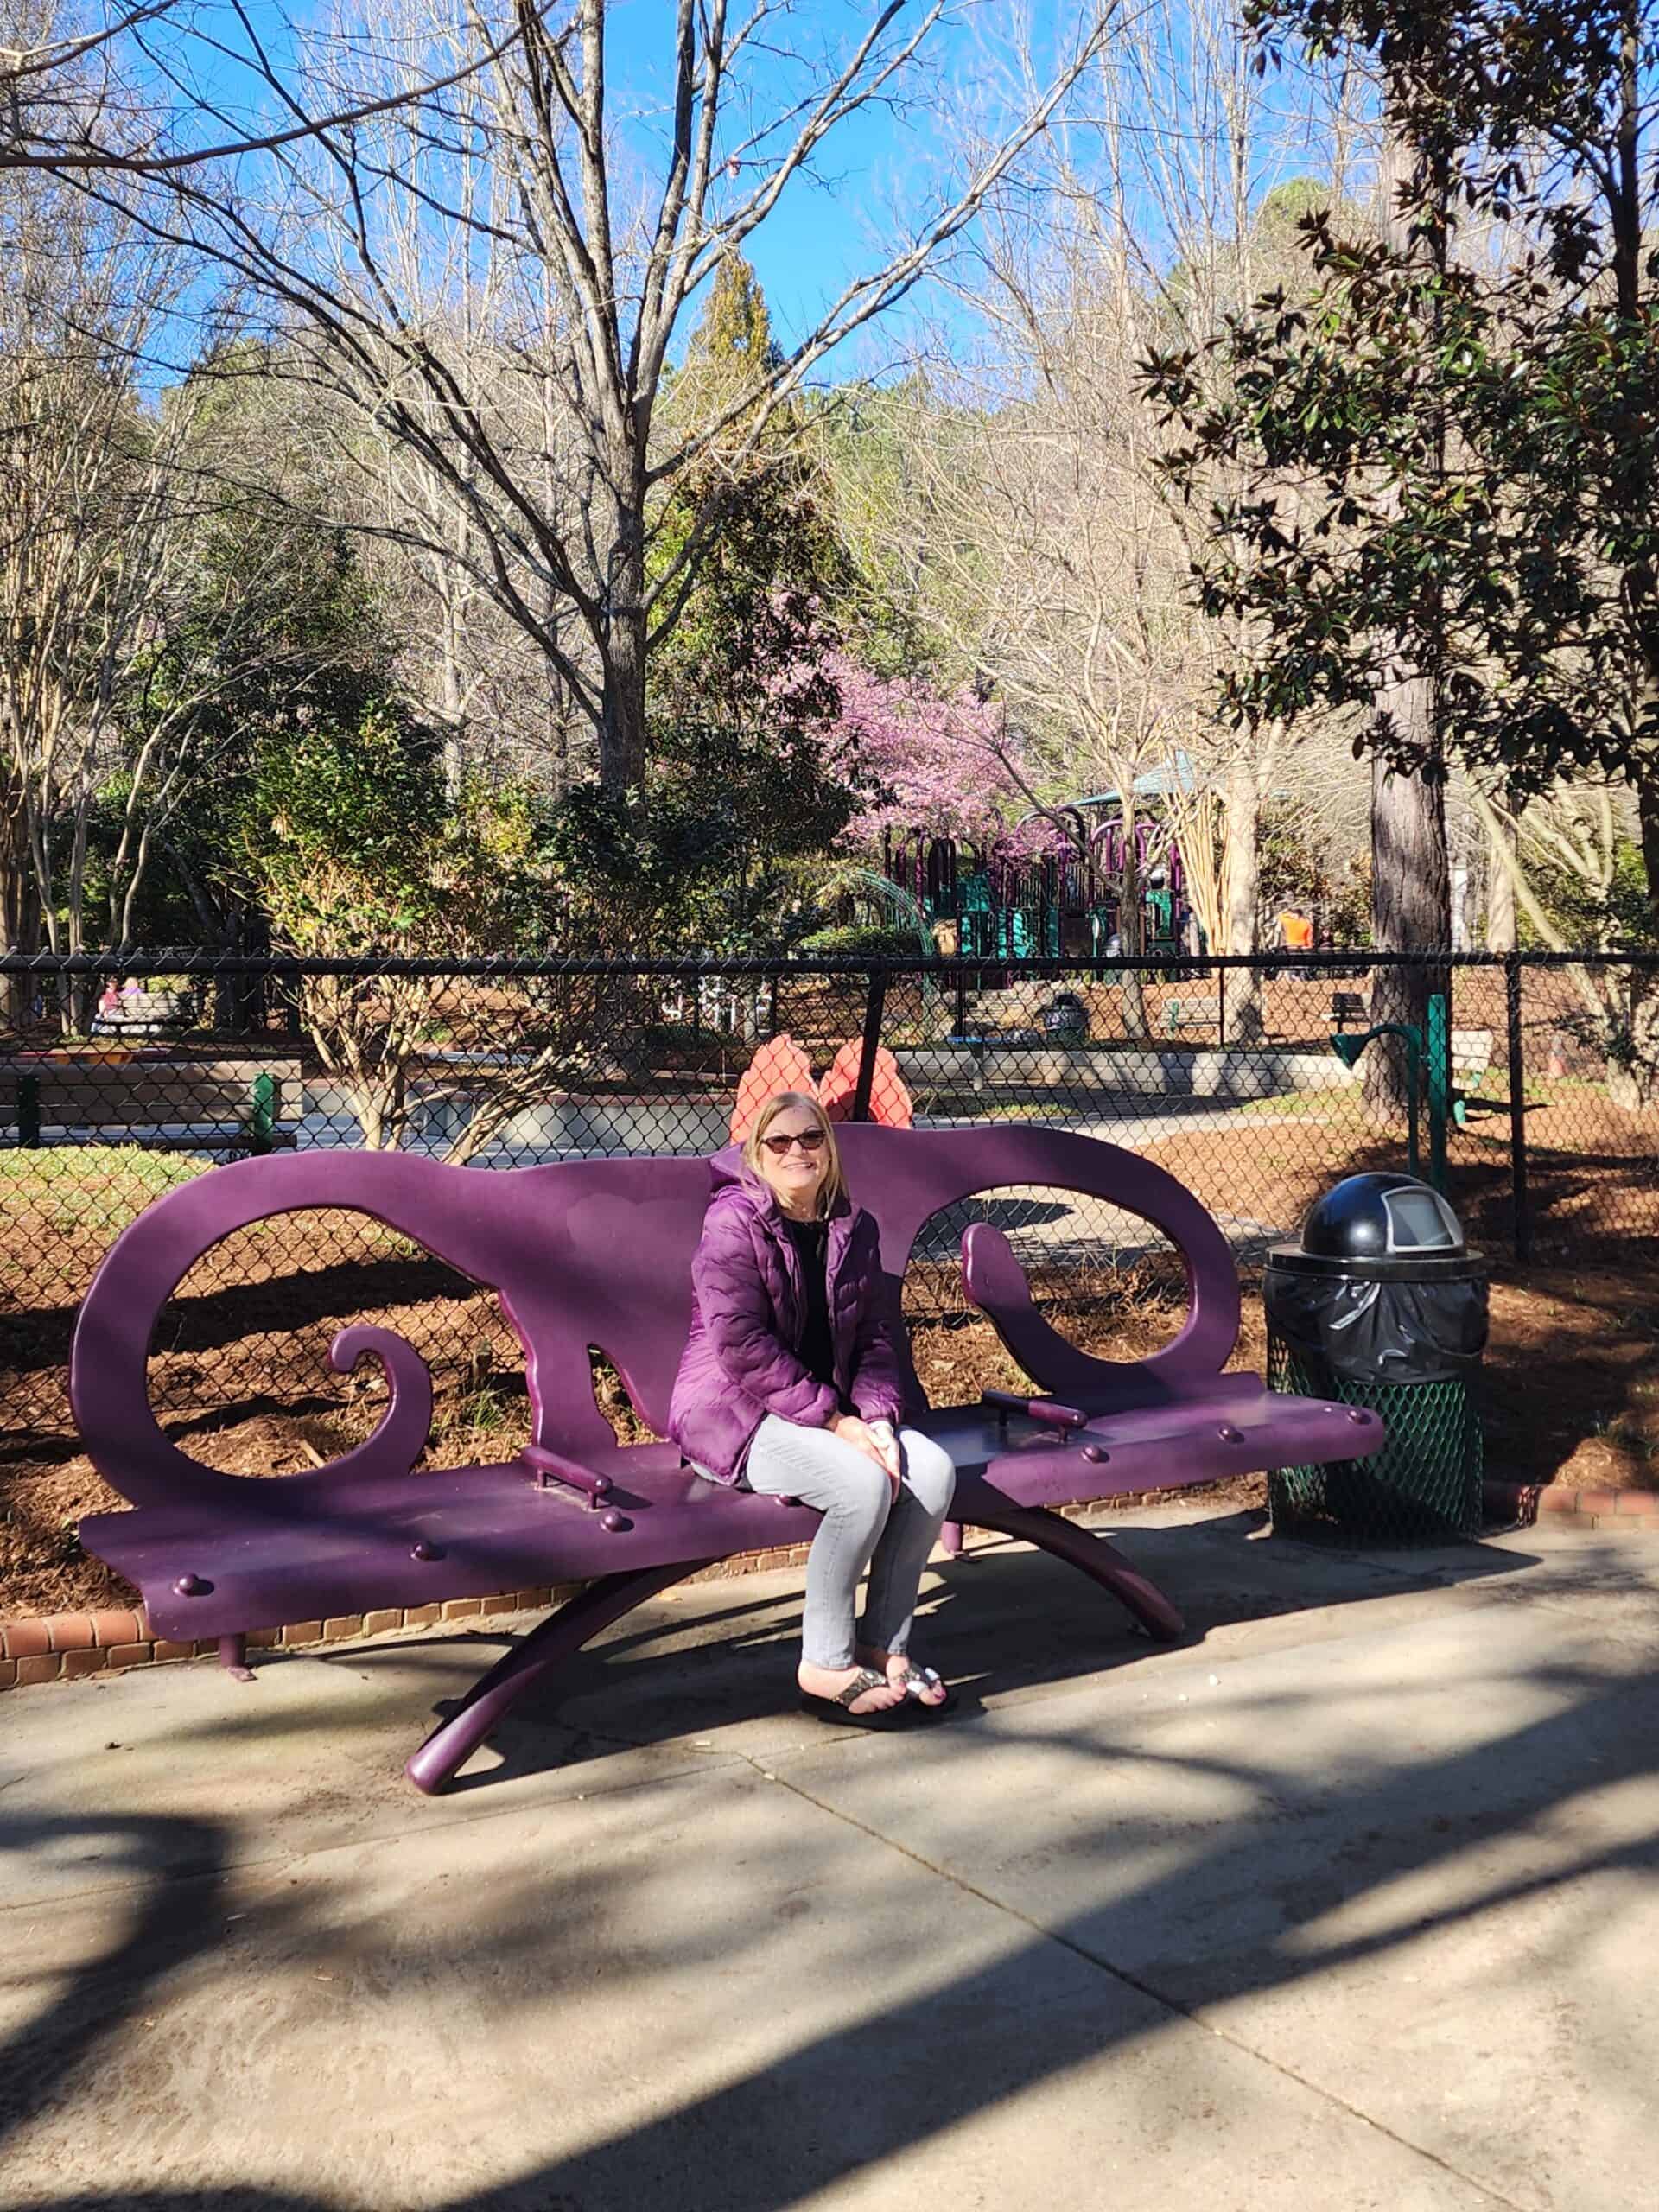 A person sits on a unique, ornate purple bench at a playground in Cary, North Carolina, with a backdrop of a fenced playground area, blooming pink cherry blossoms, and leafless trees. The scene evokes a leisurely and peaceful day at the park, with the bench's design adding a touch of whimsy to the setting